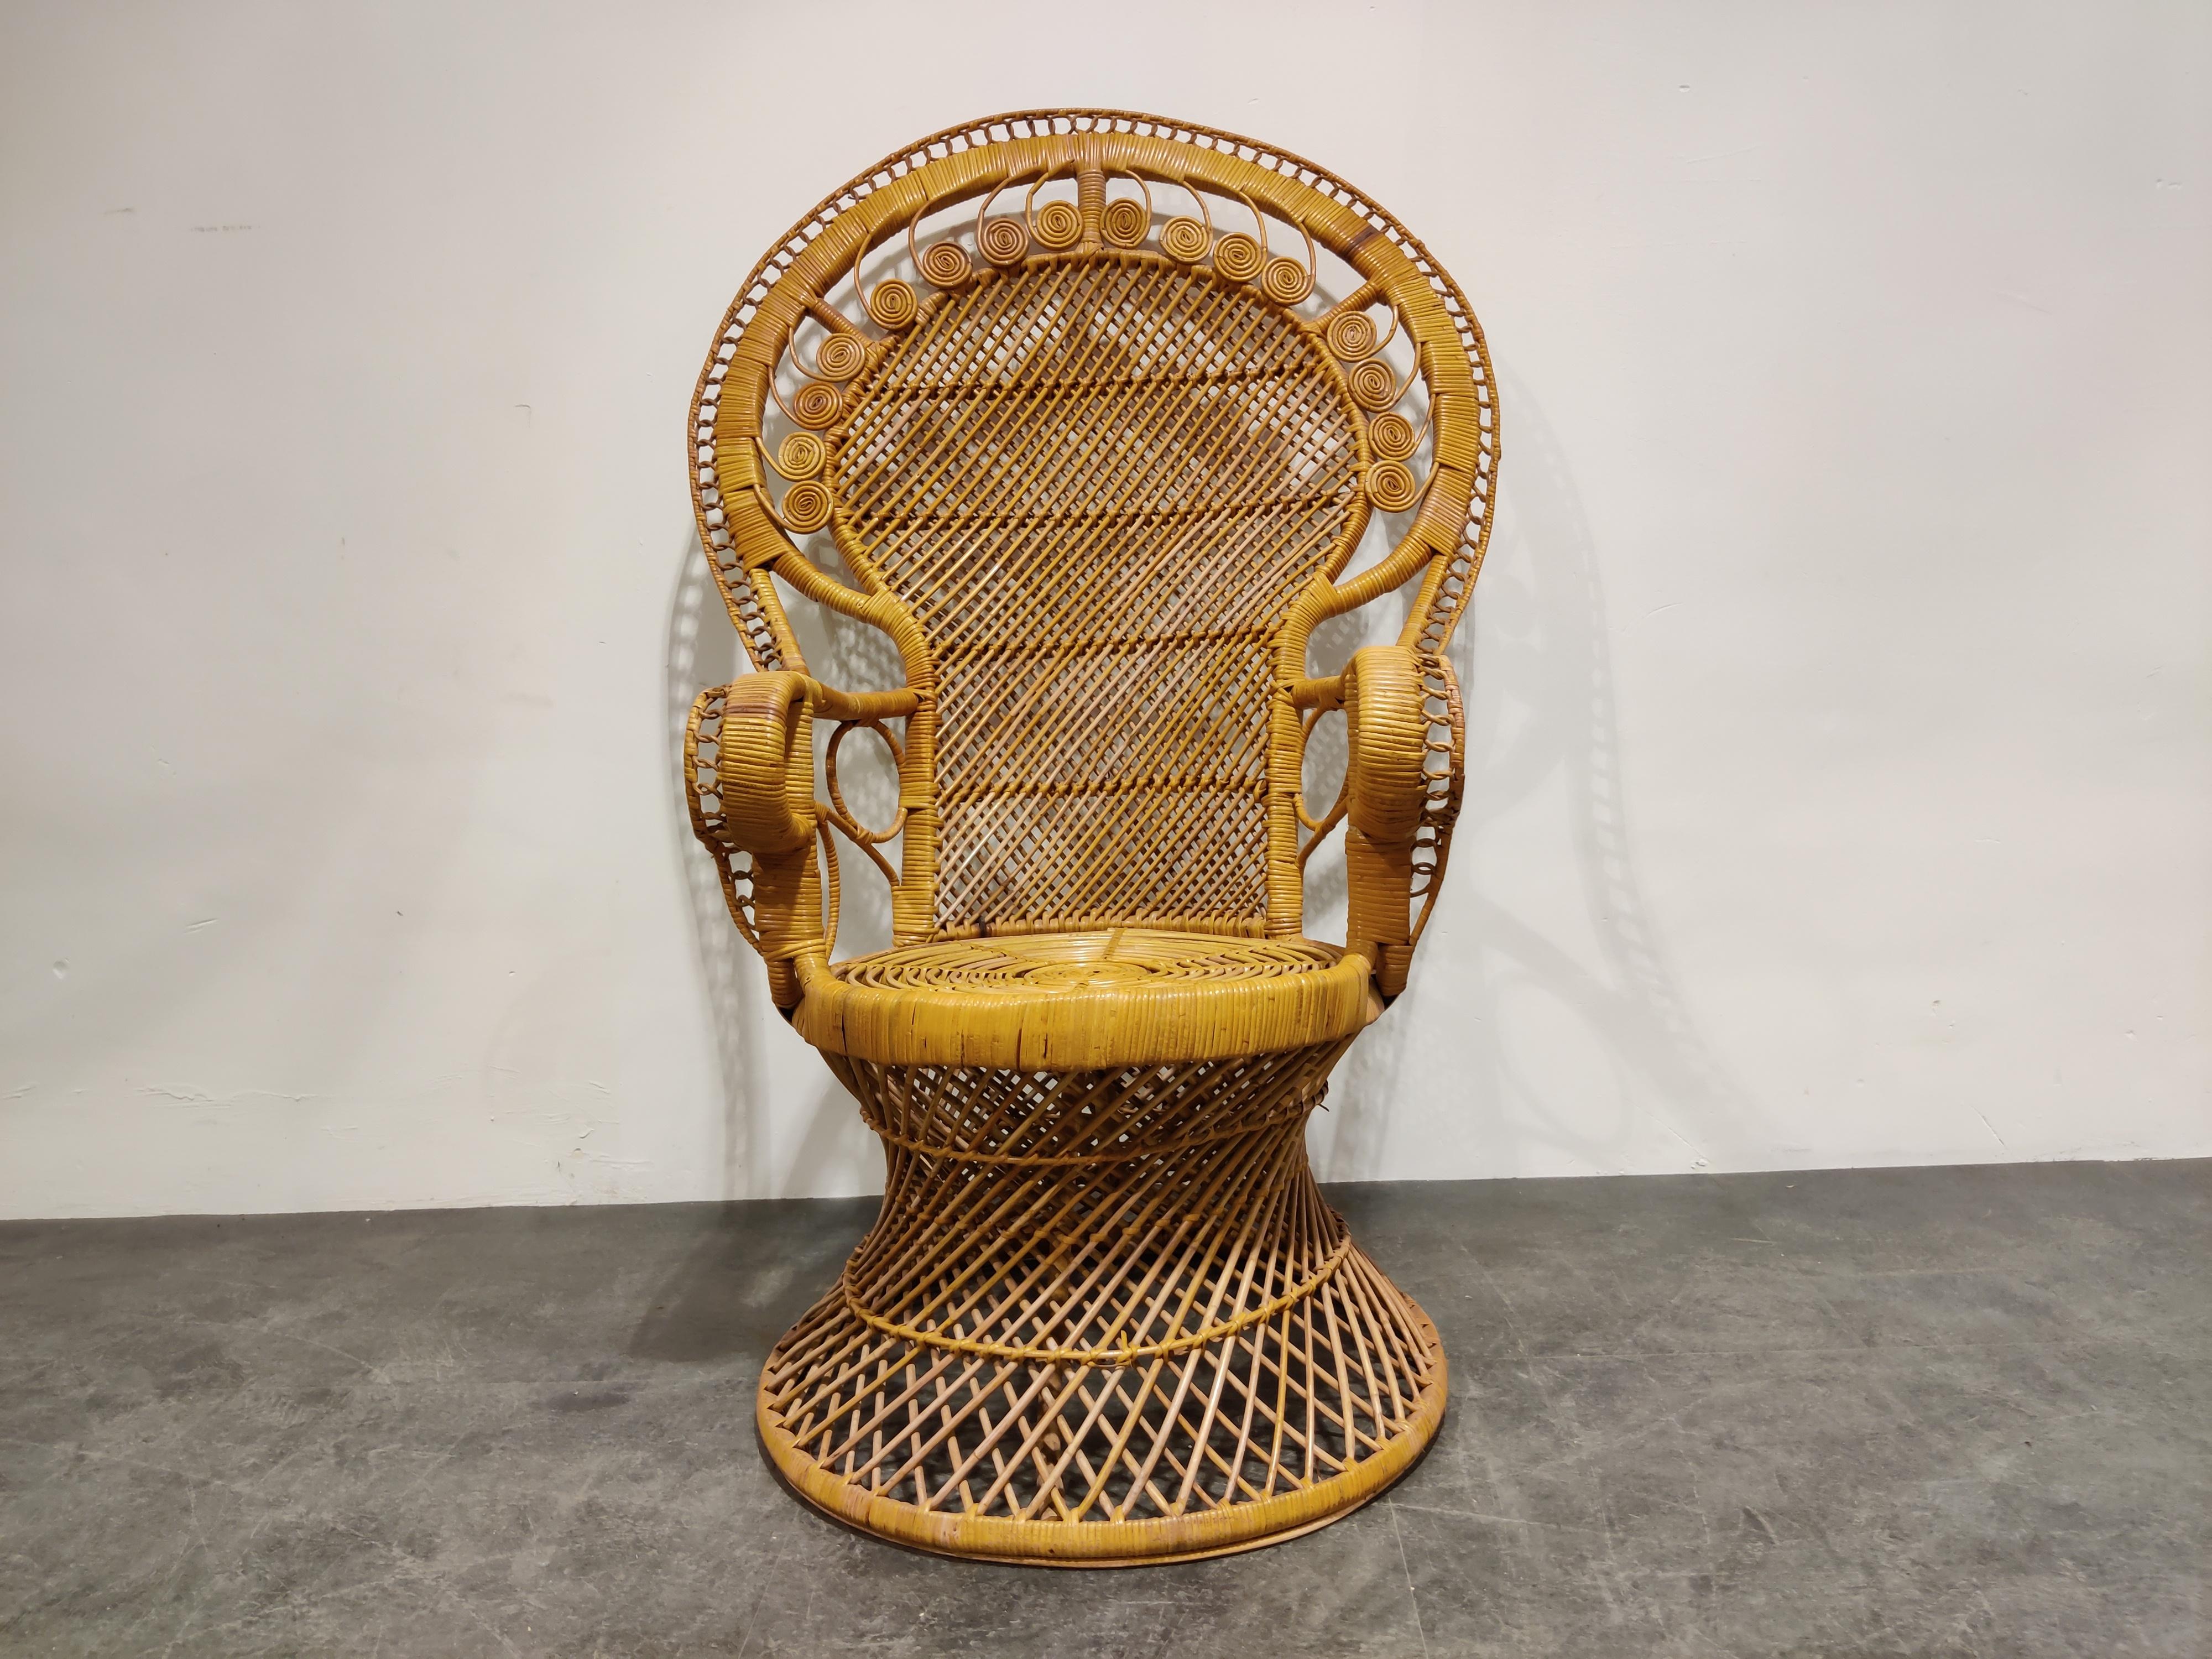 Elegant vintage peacock 'emanuelle' style chair.

Timeless and decorative pieces in the bohemian style.

Can be used both in-and outside.

Good condition.

1970s, Asia

Measures: Height 120cm/47.24